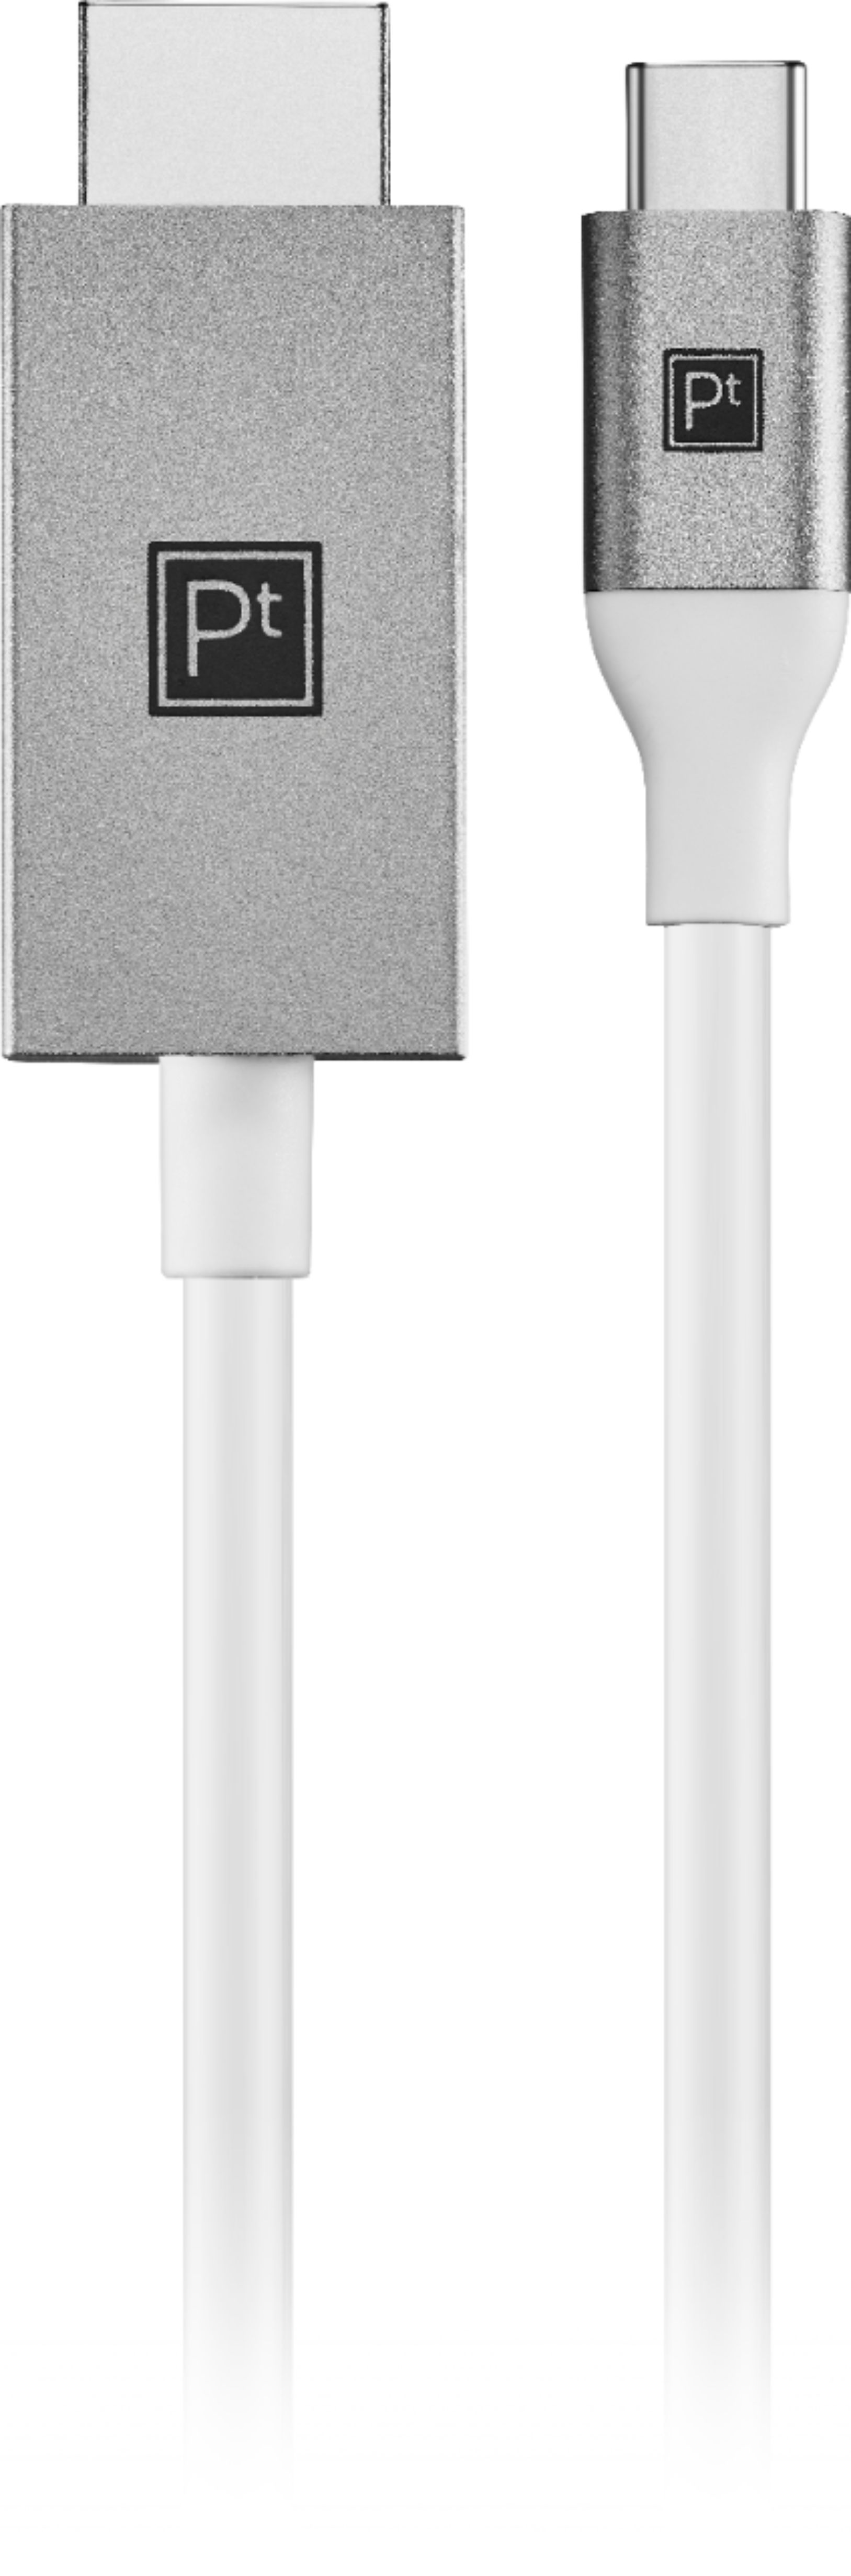 Platinum™ - 6' USB-C-to-HDMI Cable for MacBook, Chromebook or Laptops with a USB-C Port - Gray